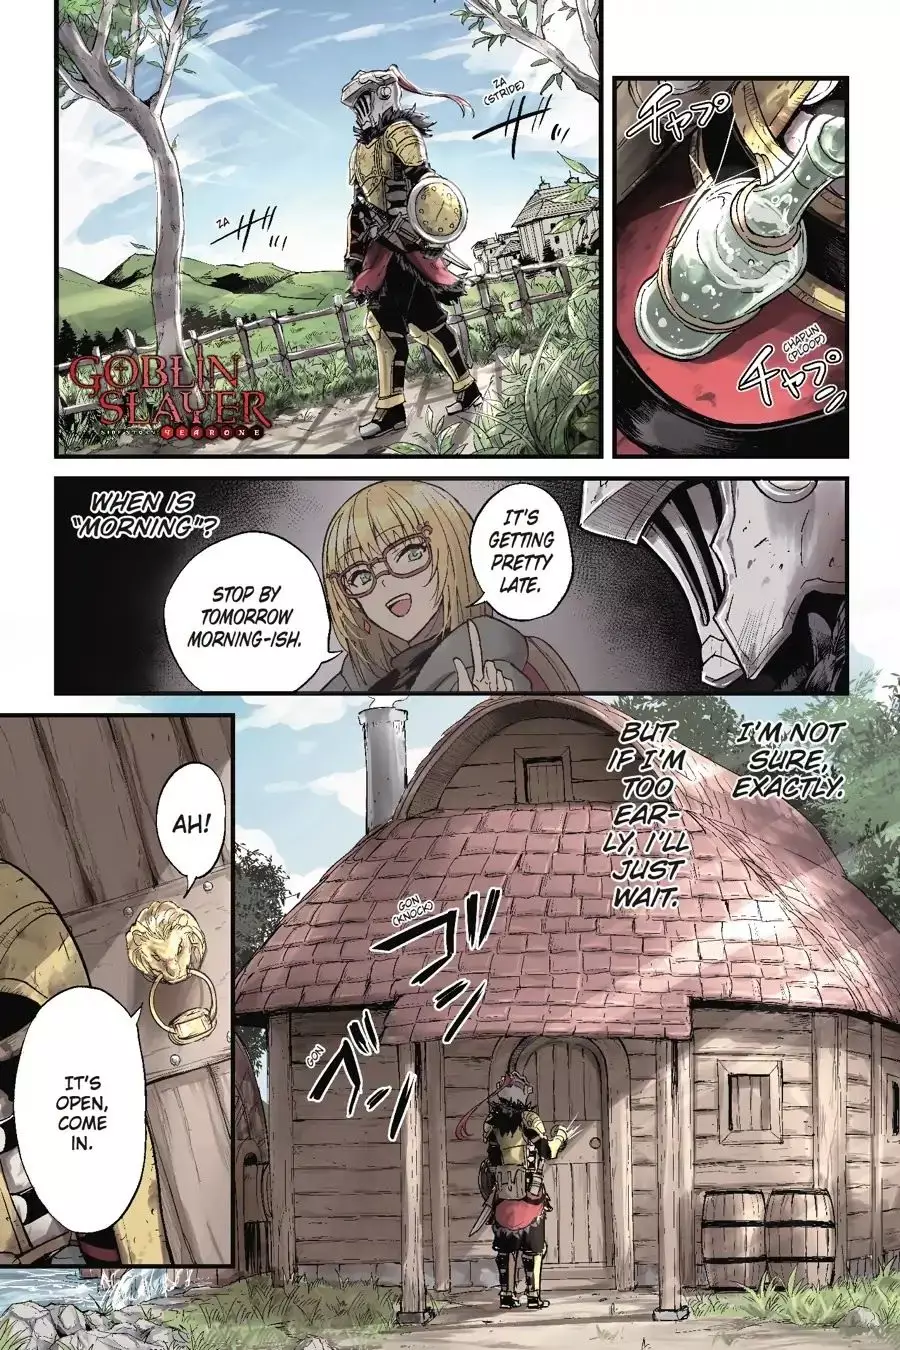 Goblin Slayer: Side Story Year One - 25 page 002